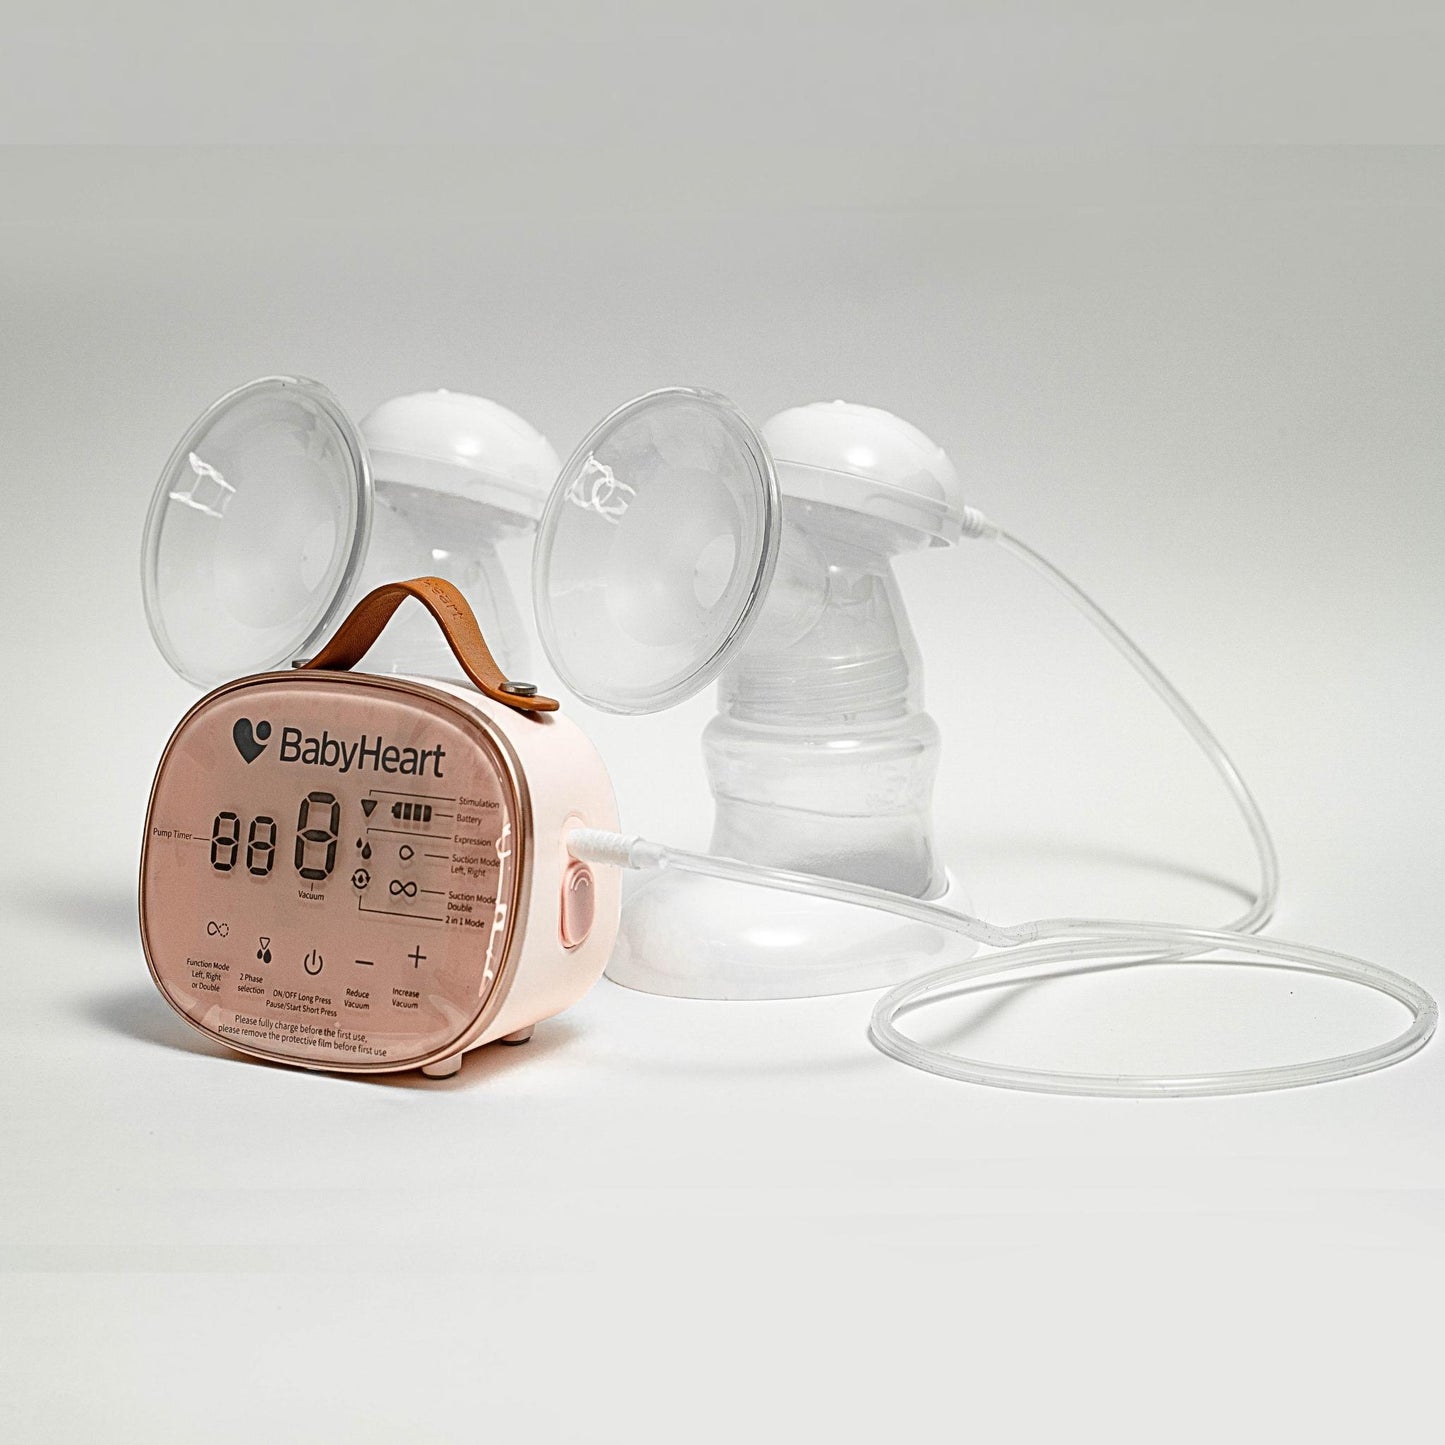 BabyHeart’s double electric breast pump unit and pumps